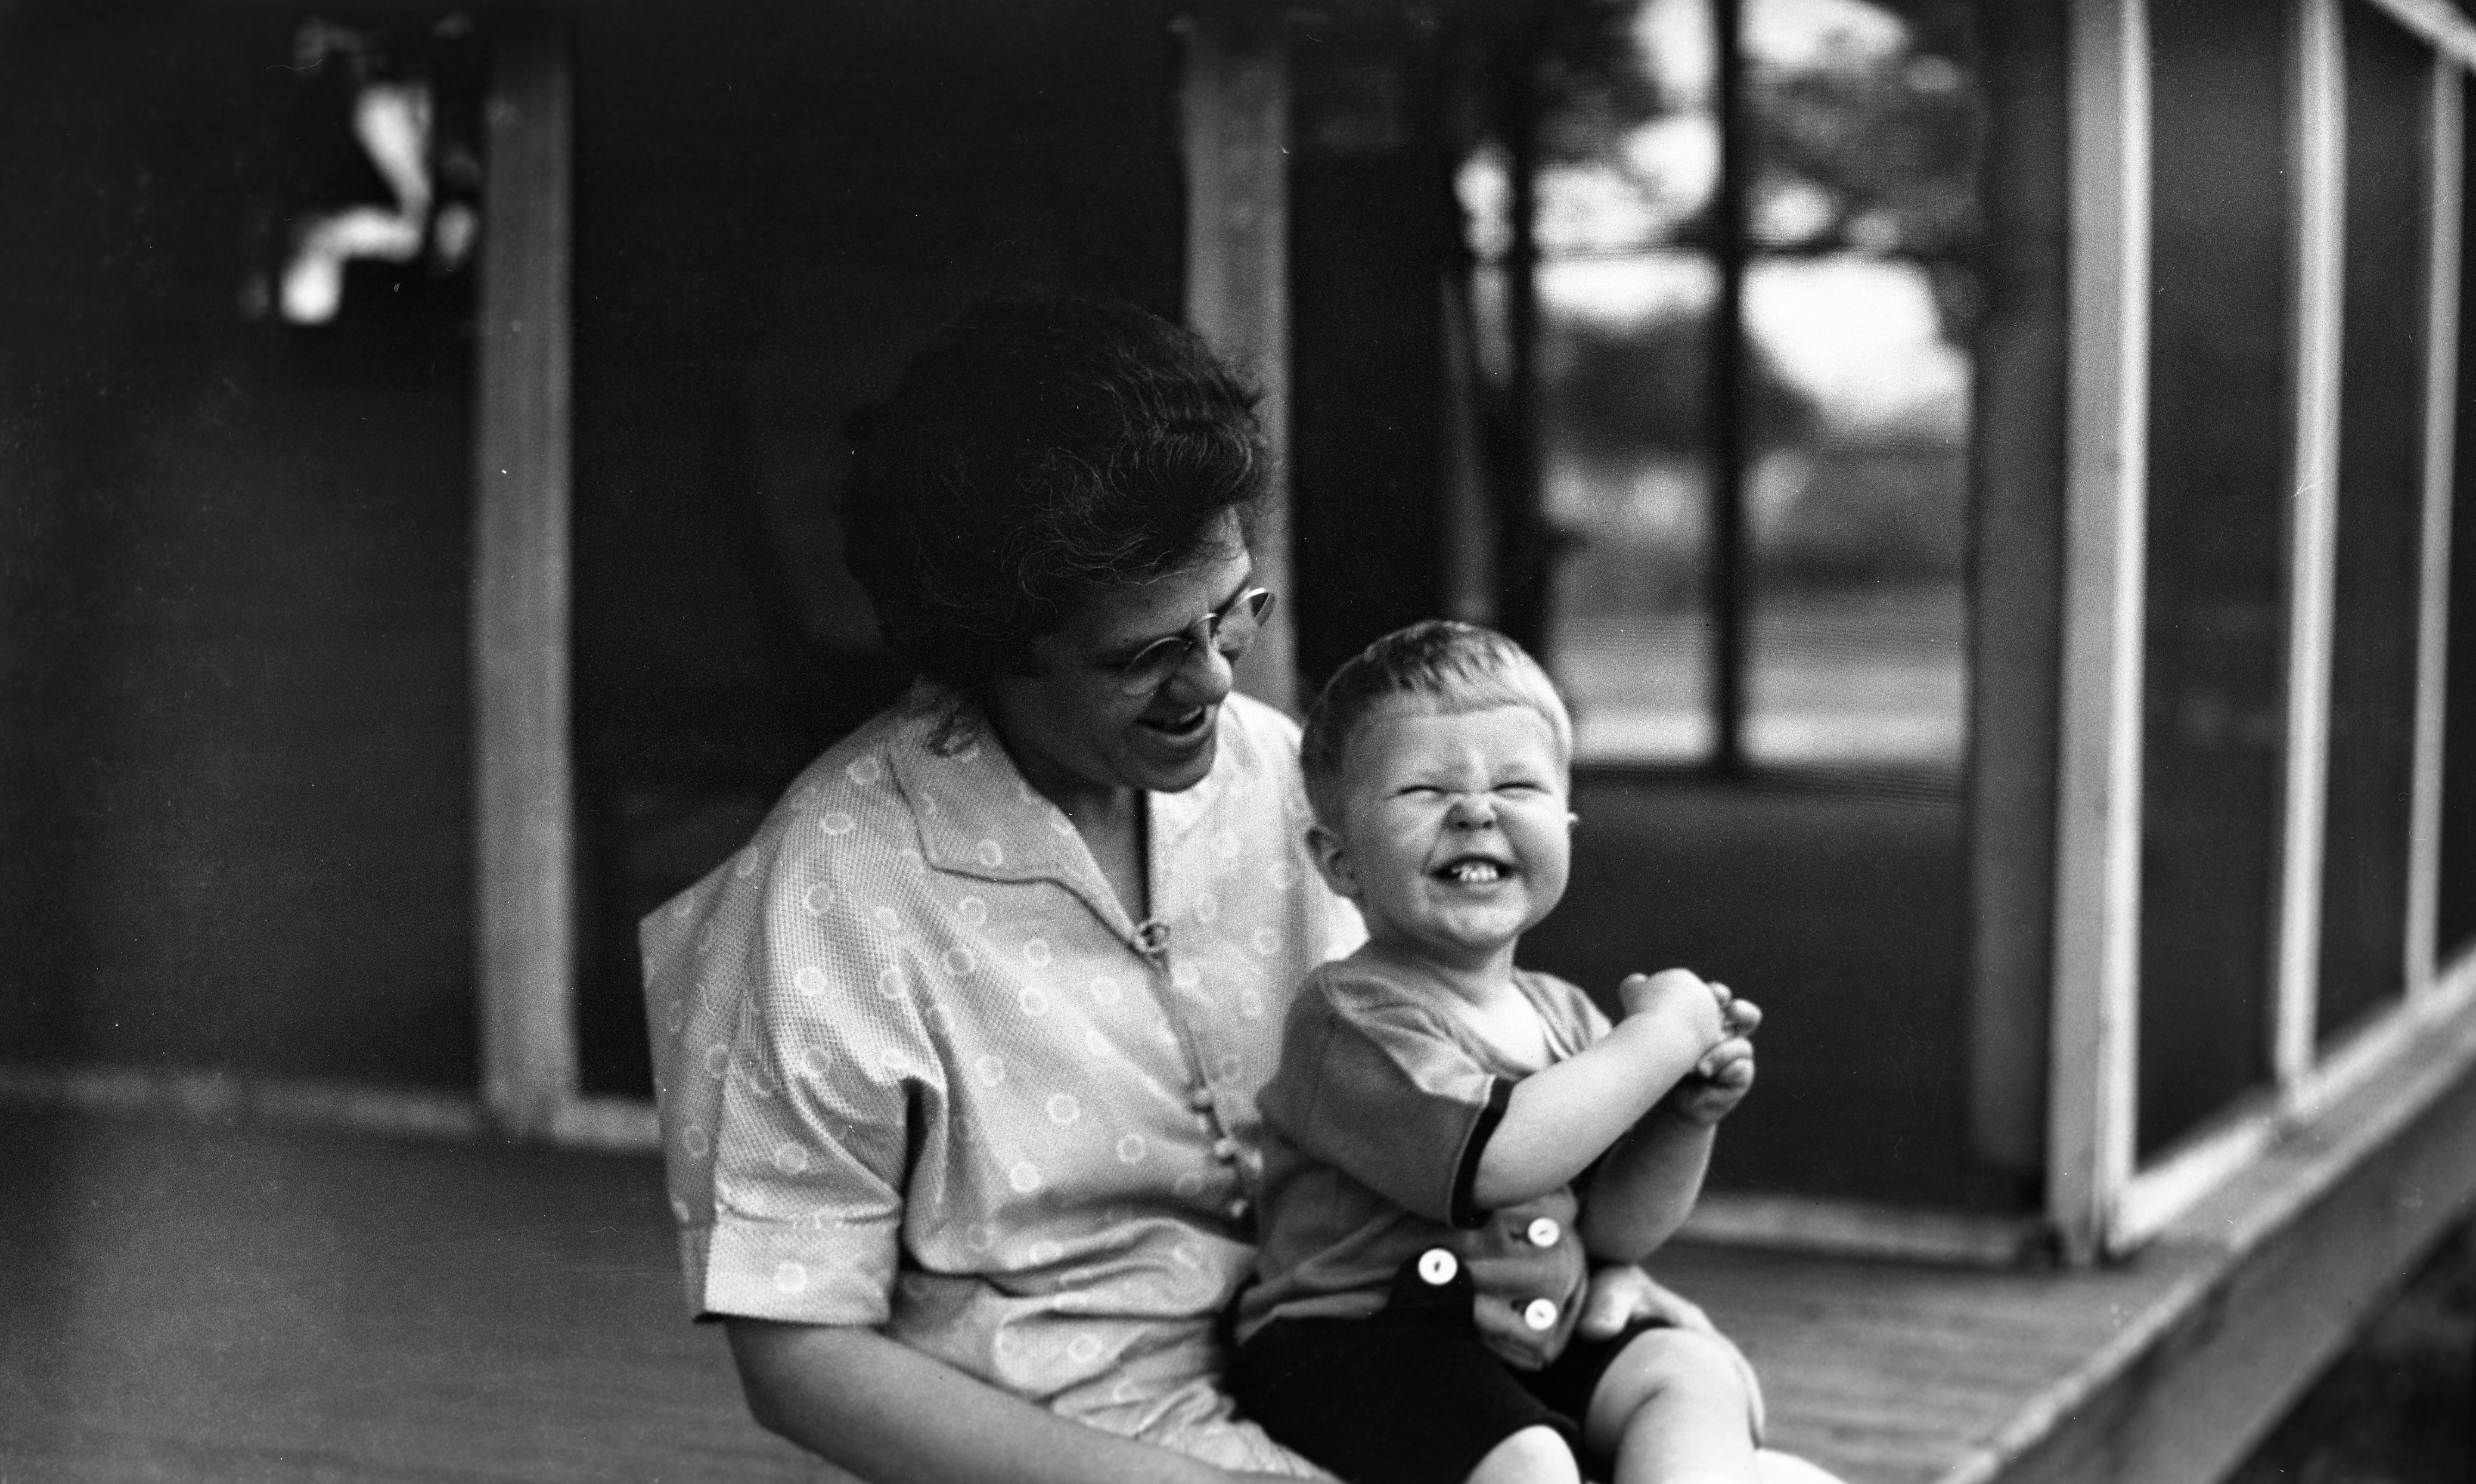 Black and white image of a smiling toddler seated on a woman's lap on a porch